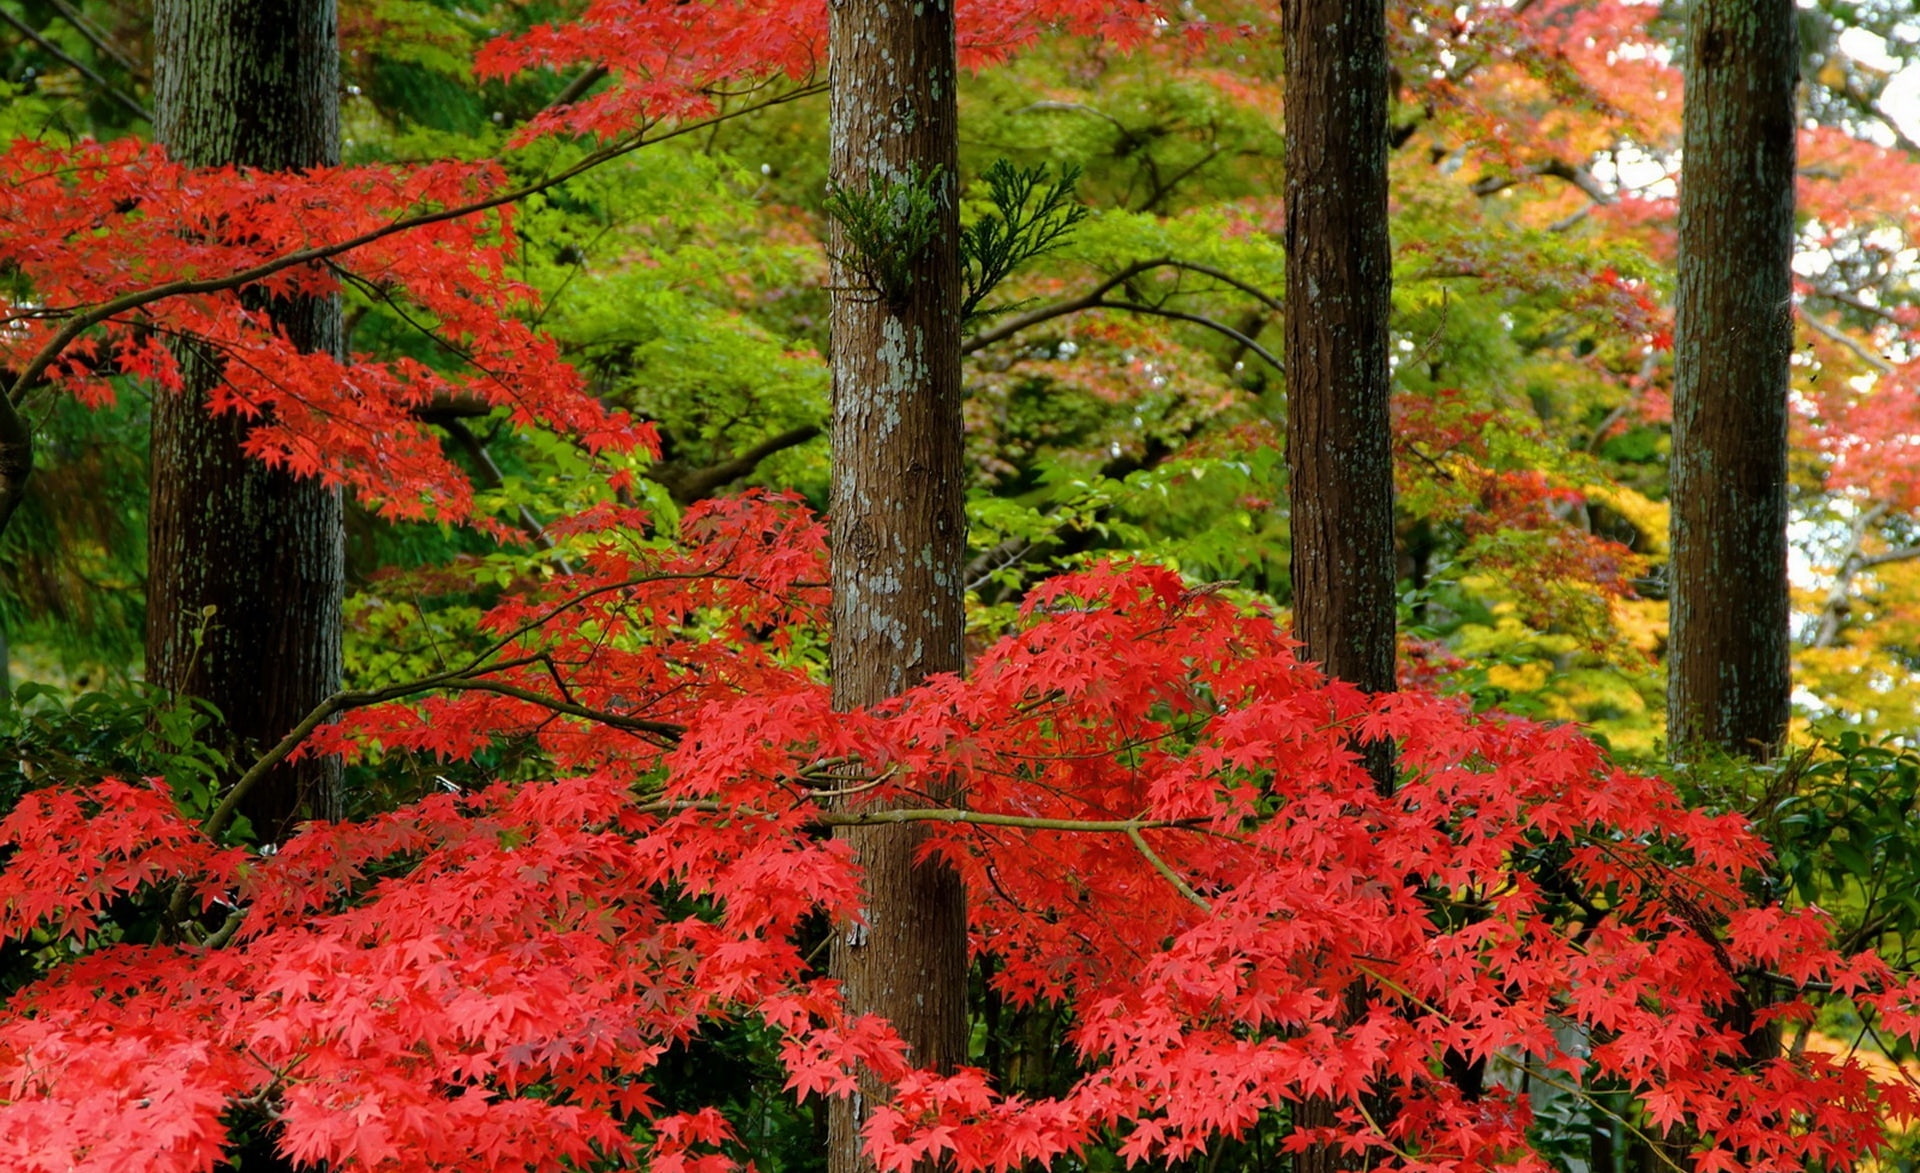 Autumn in Japan, red leafed tree, Seasons, Nature, Trees, Fall